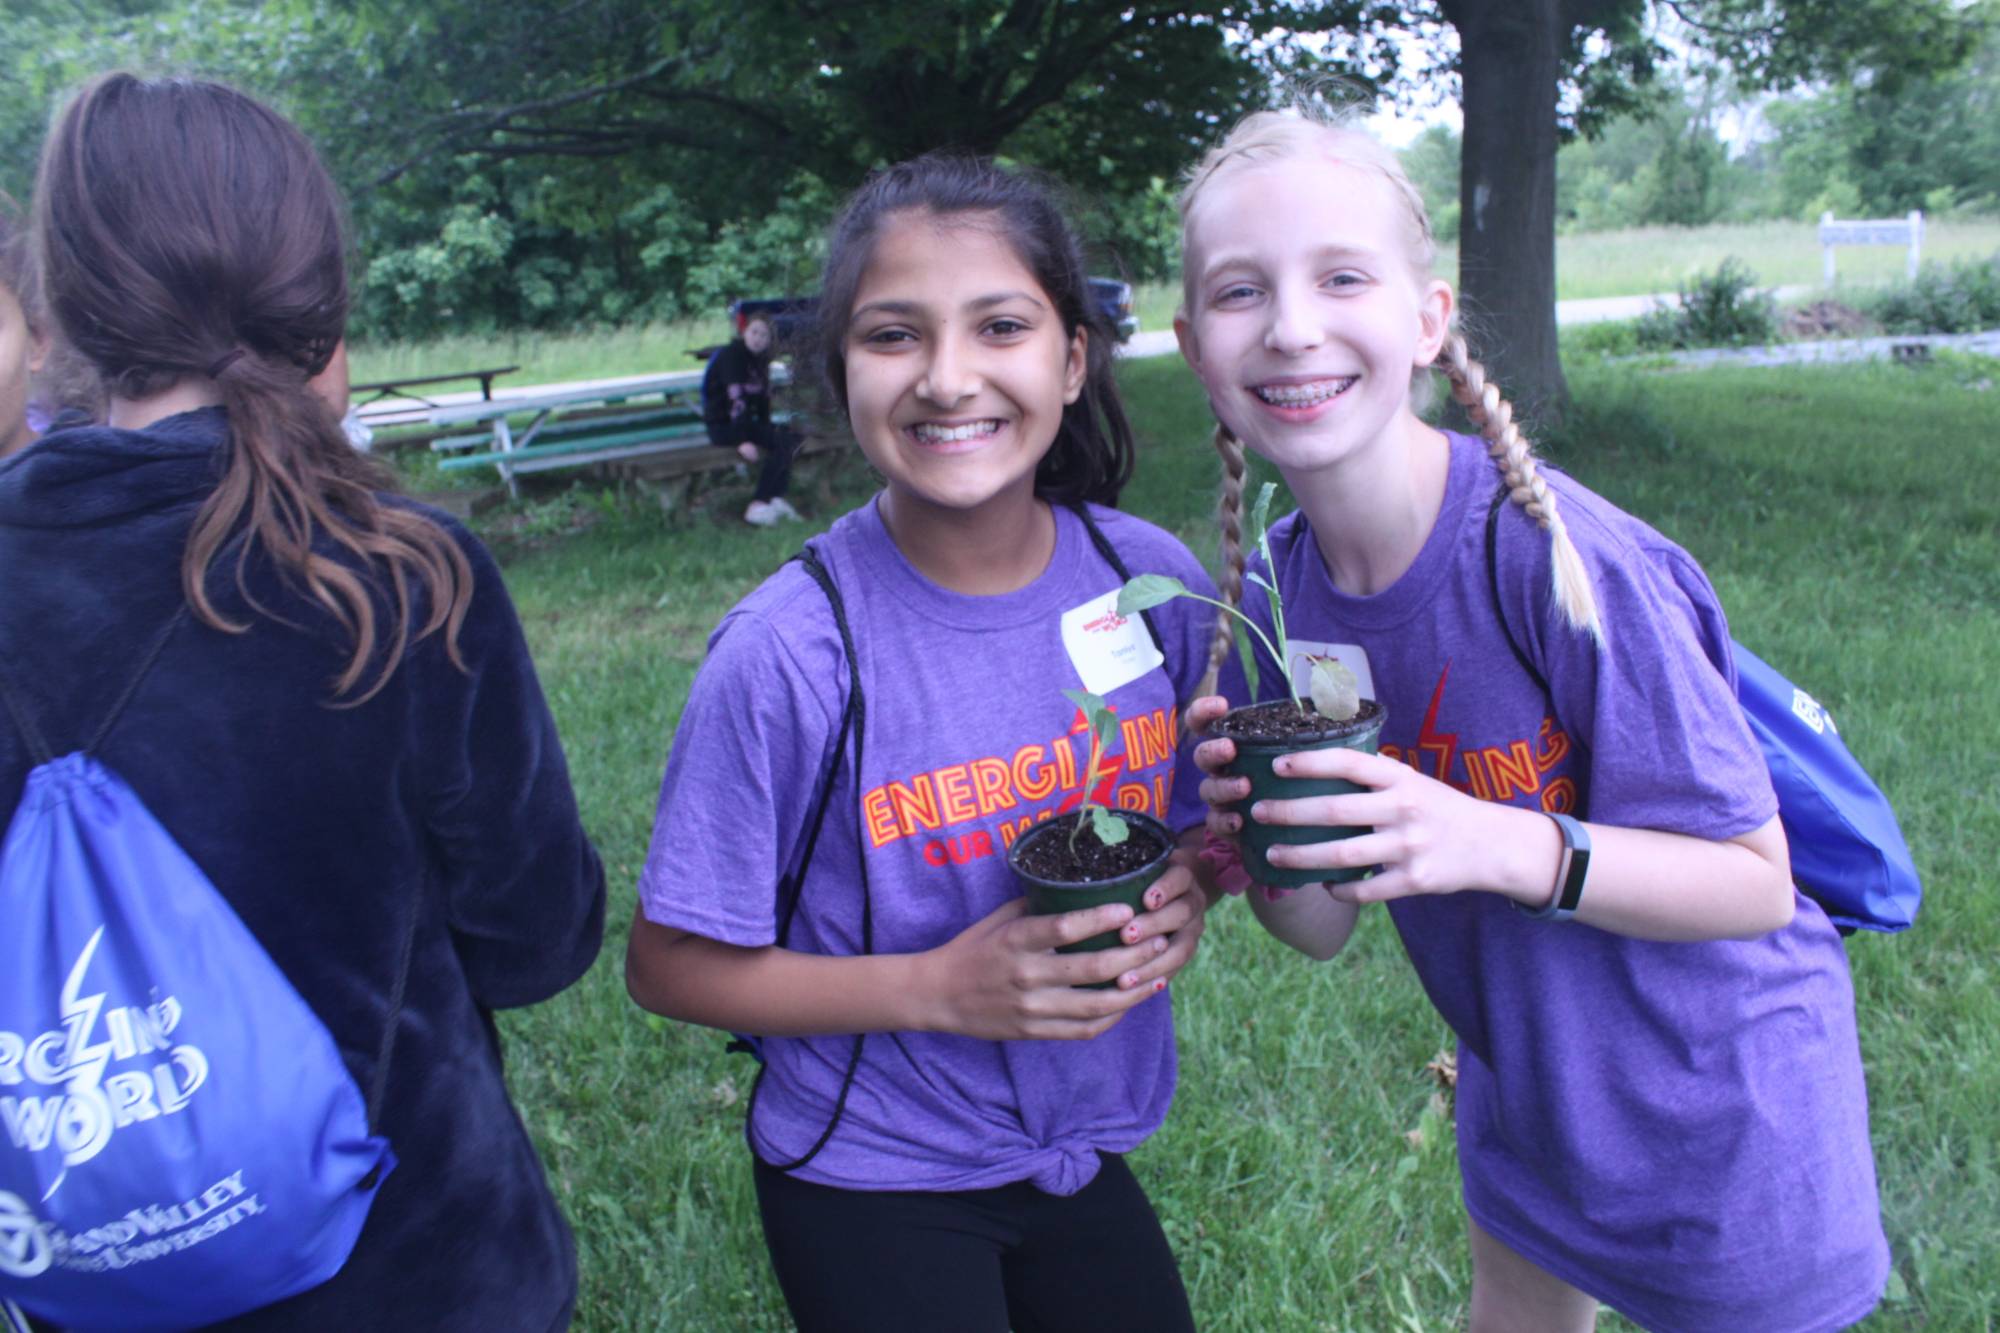 Girls at Energizing our World camp